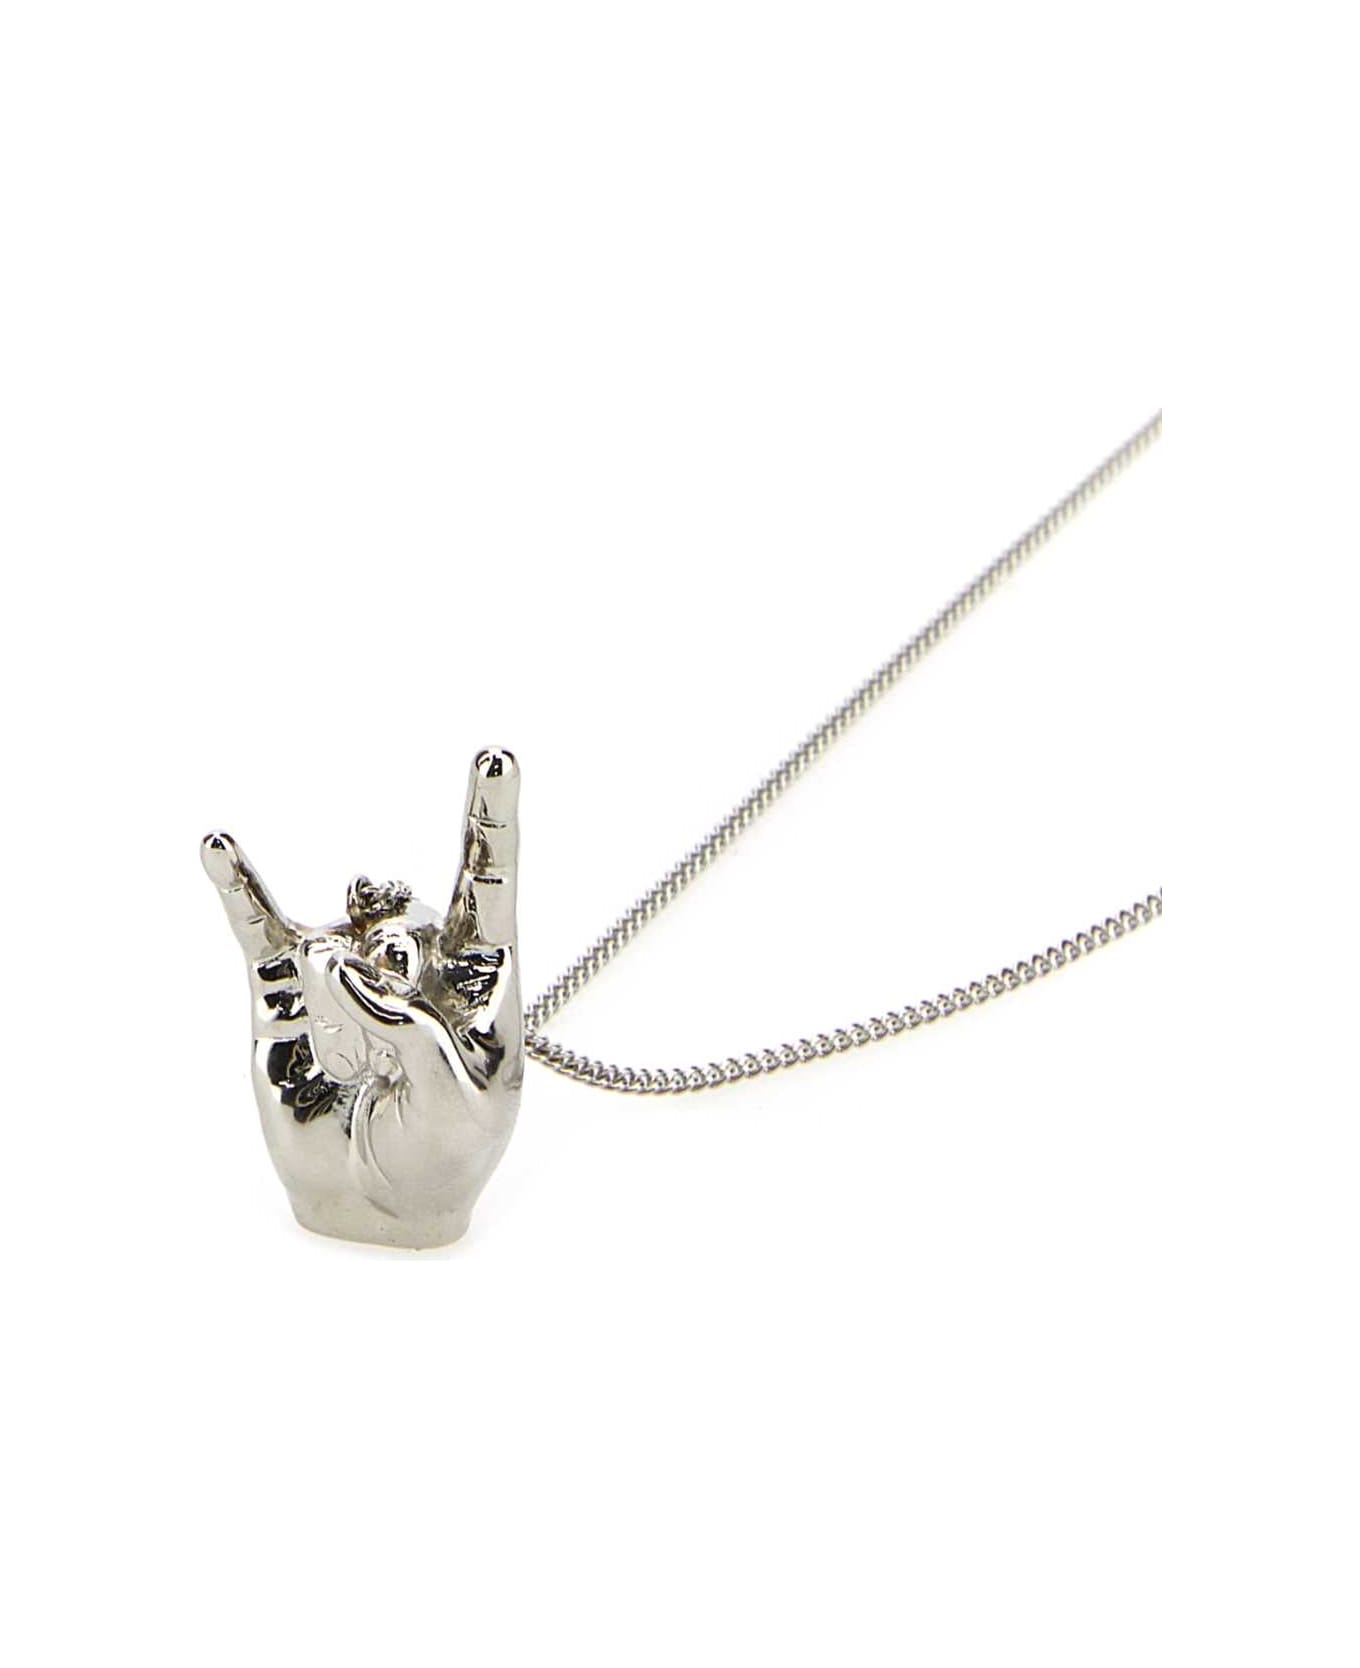 Y/Project Silver Metal Necklace - SILVER ネックレス